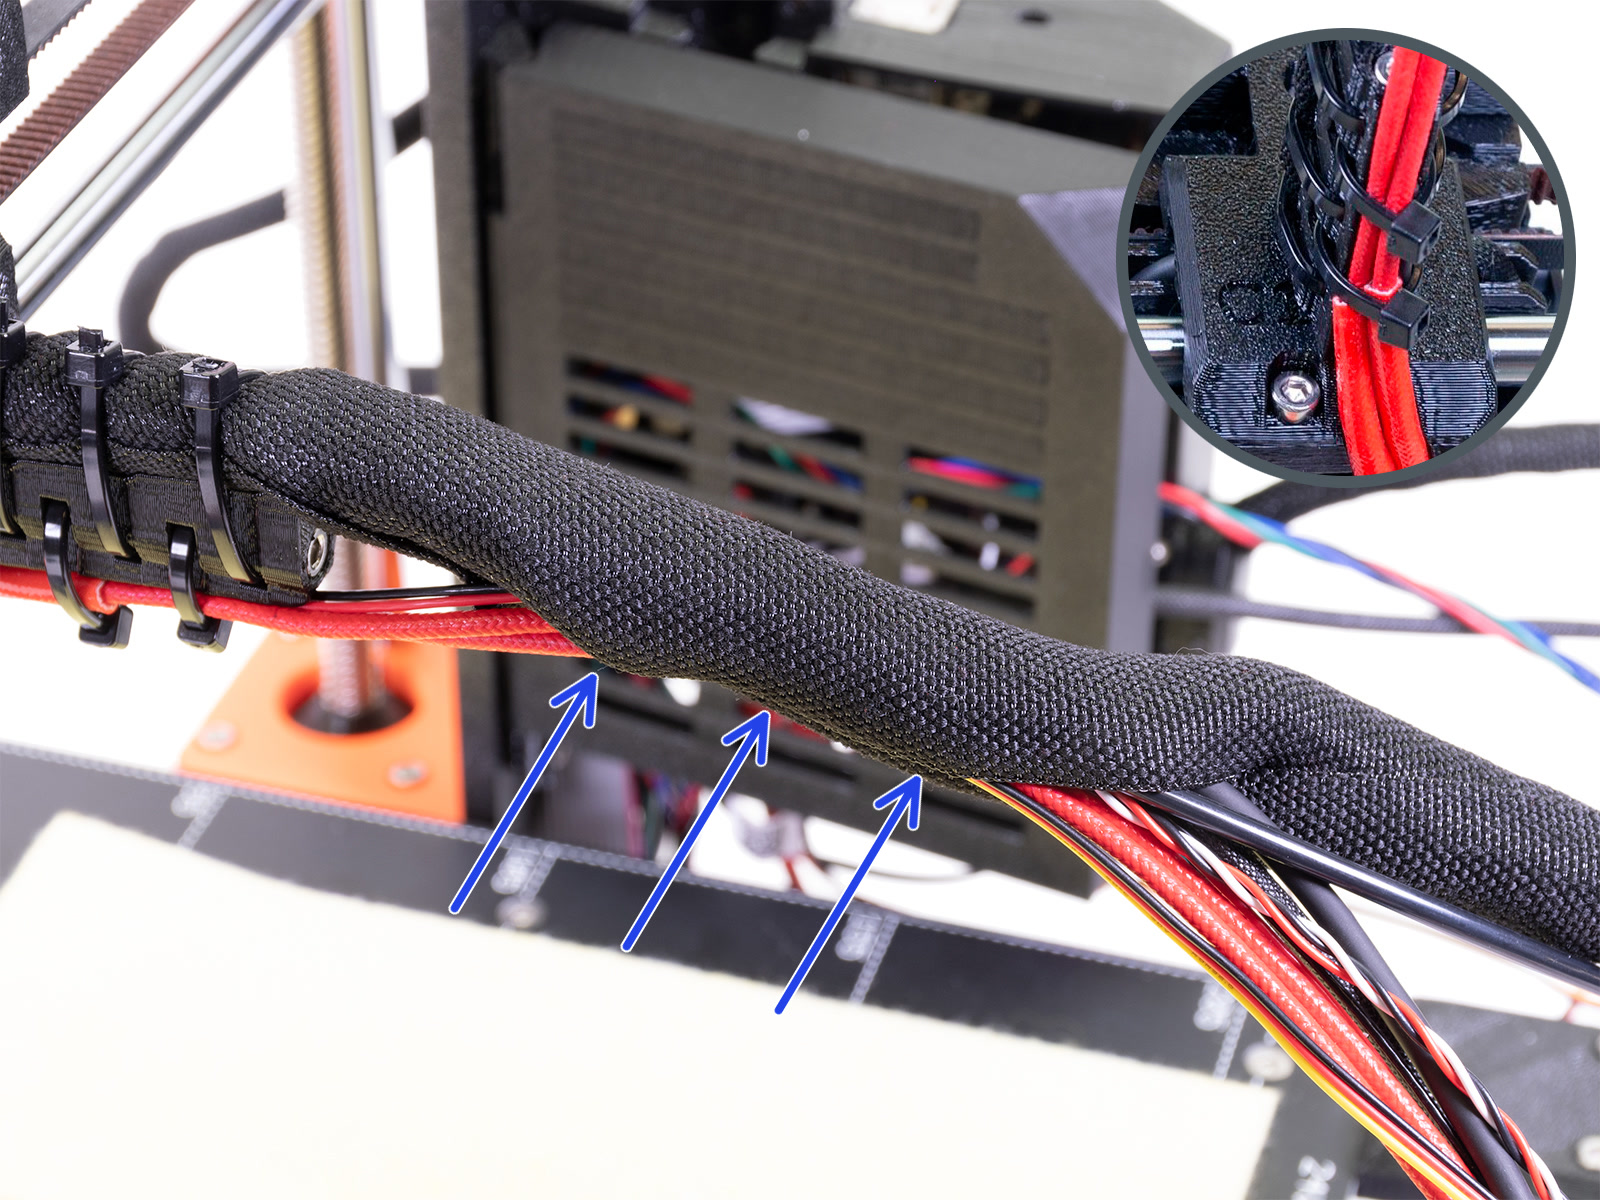 Tightening the hotend cables